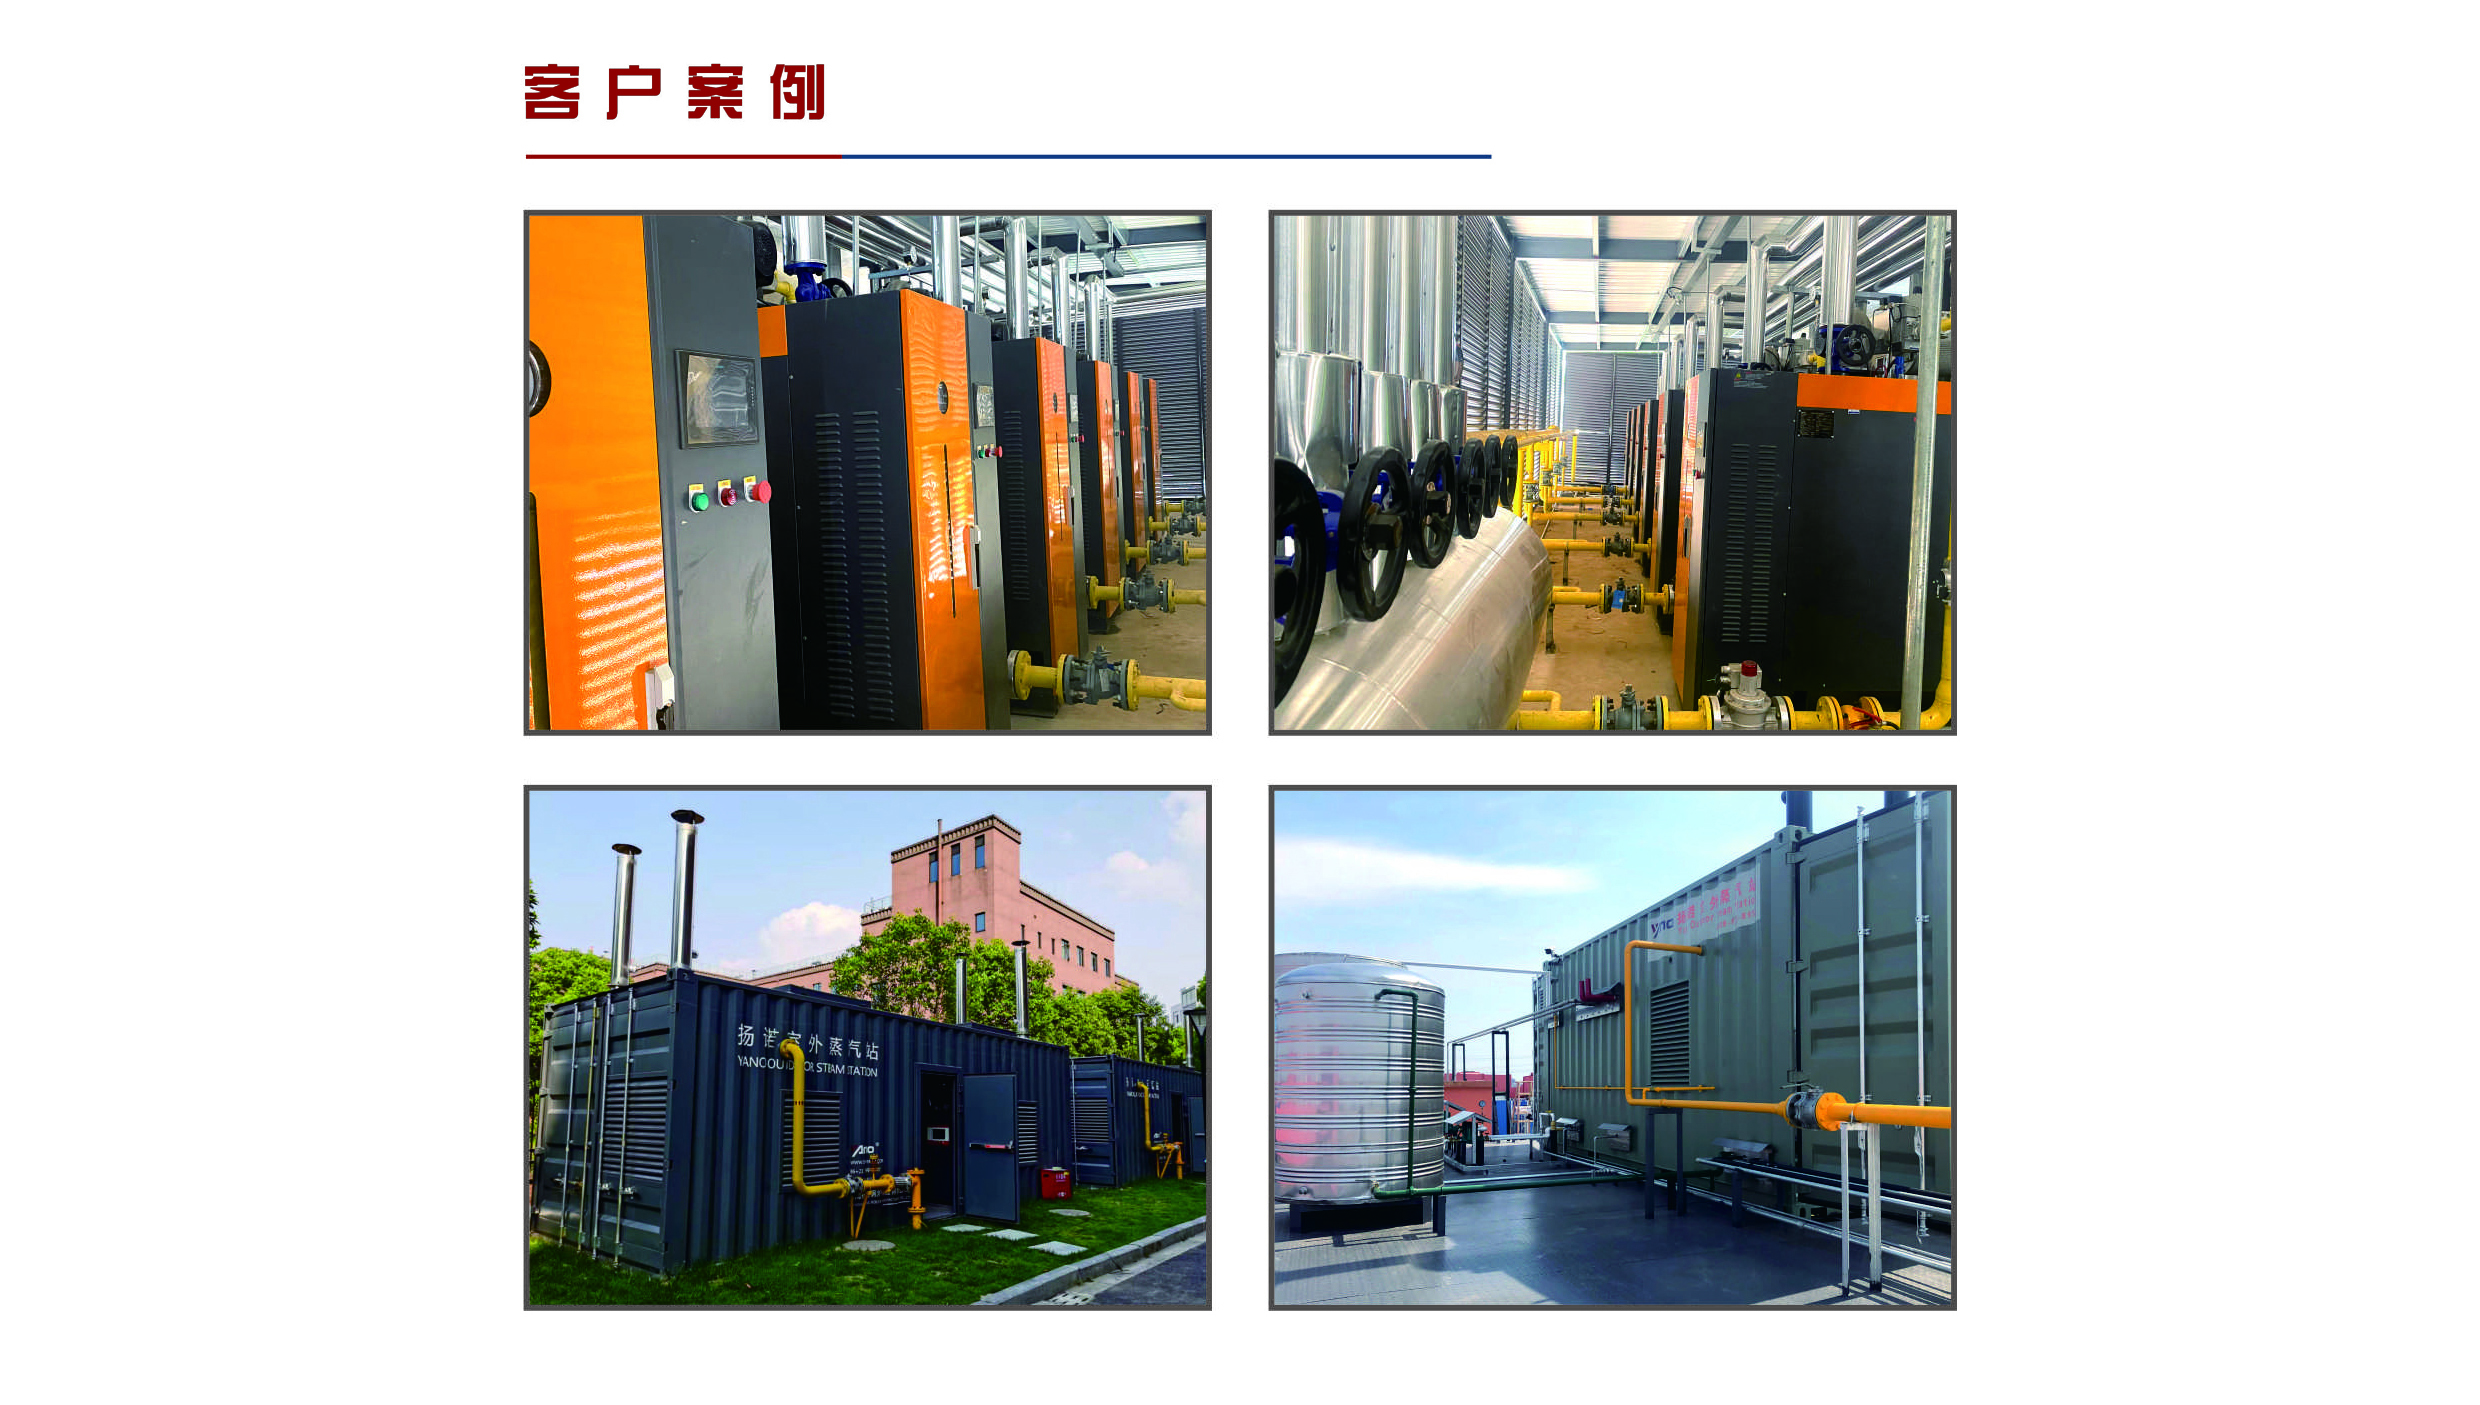 0.3-1 ton gas steam generator, fully automatic steam boiler, inspection free washing, chemical disinfection boiler